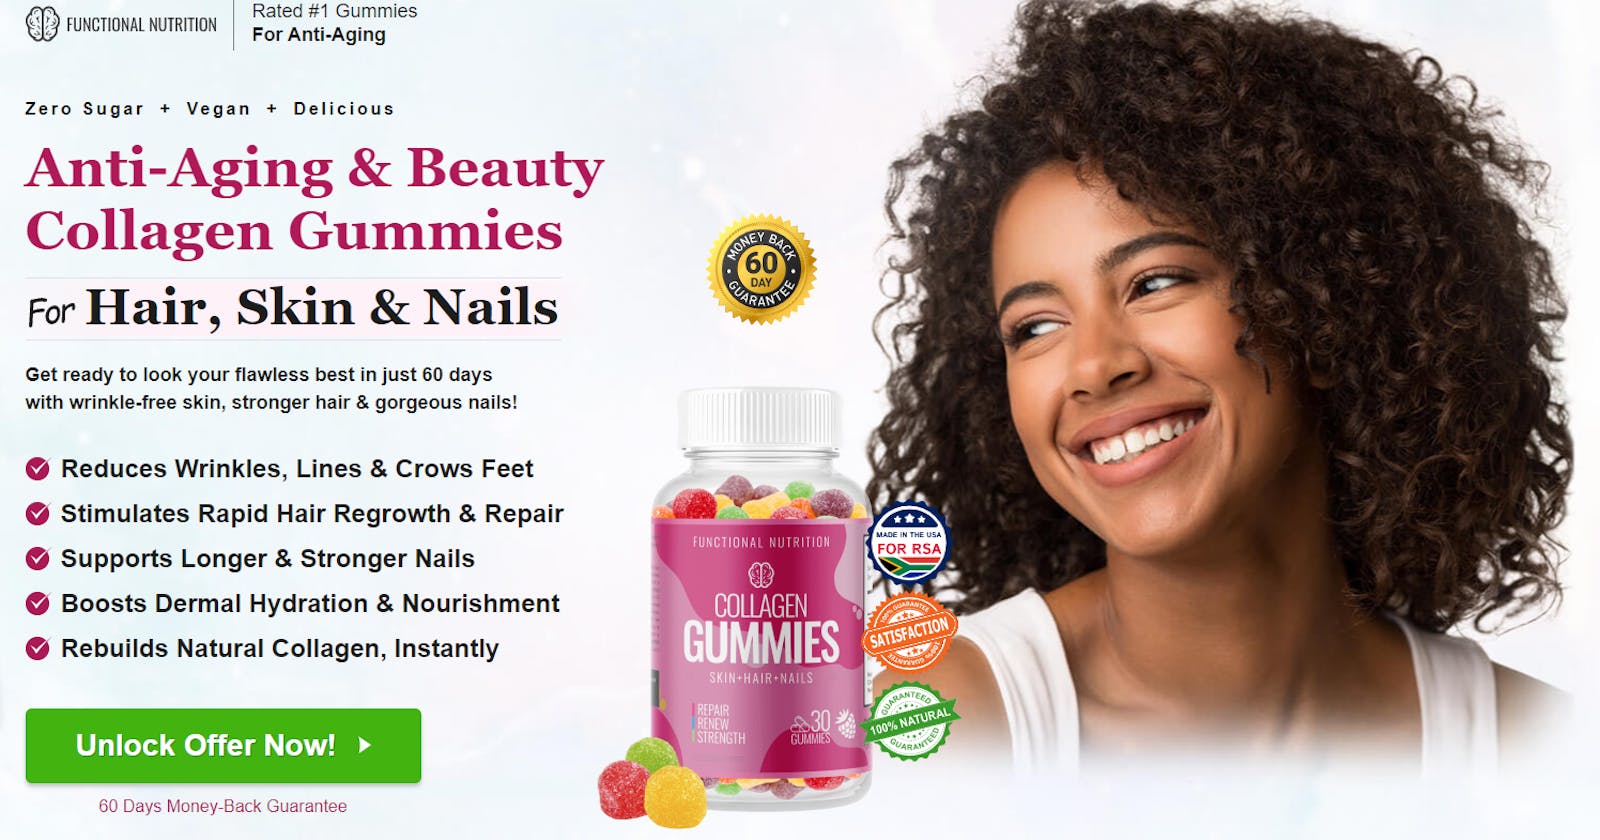 Enhance Your Beauty from Within: Functional Nutrition Collagen Gummies Explained